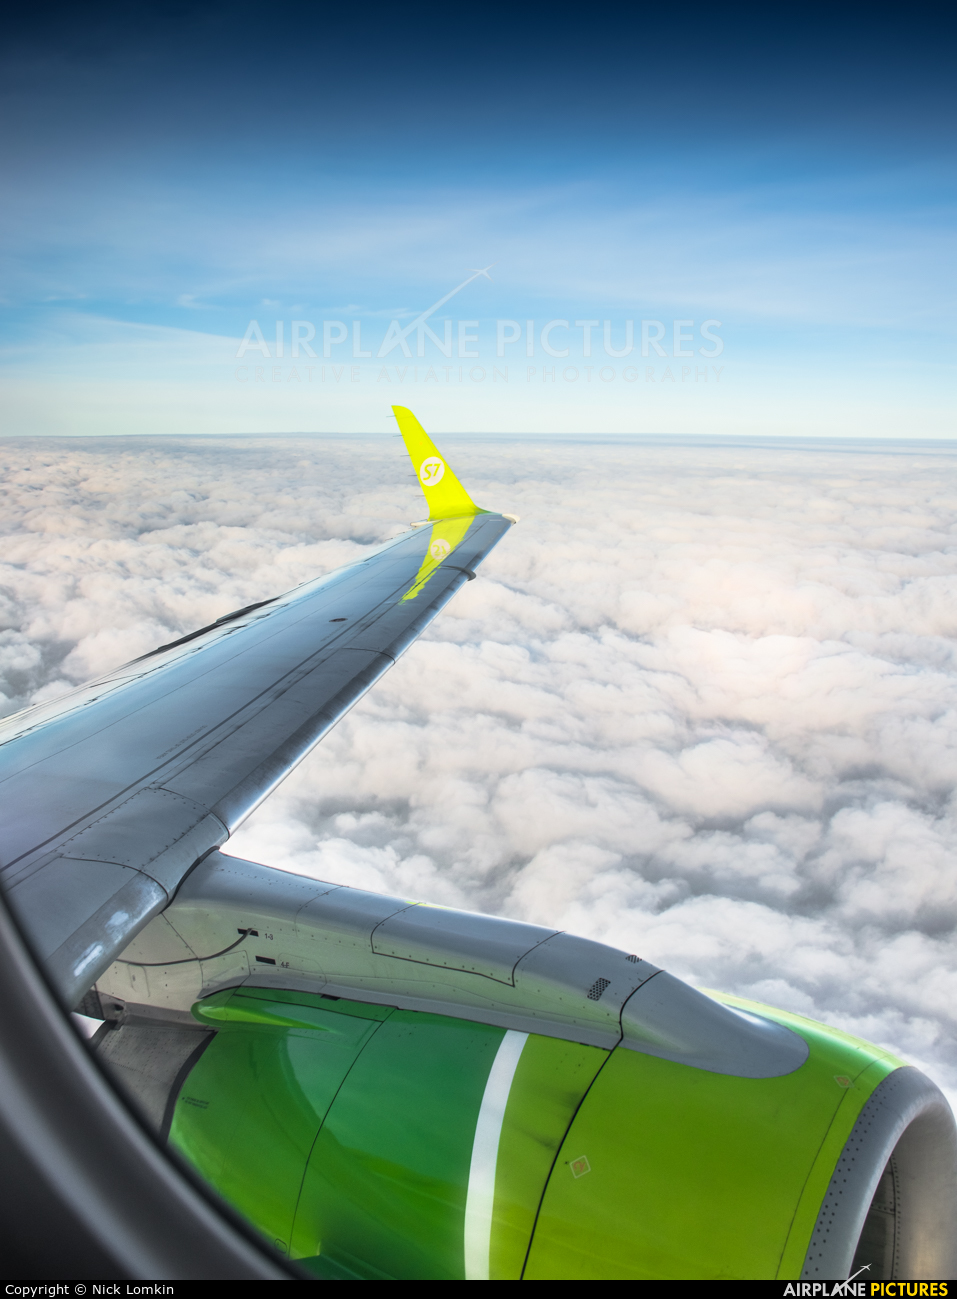 S7 Airlines VQ-BYV aircraft at In Flight - Russia